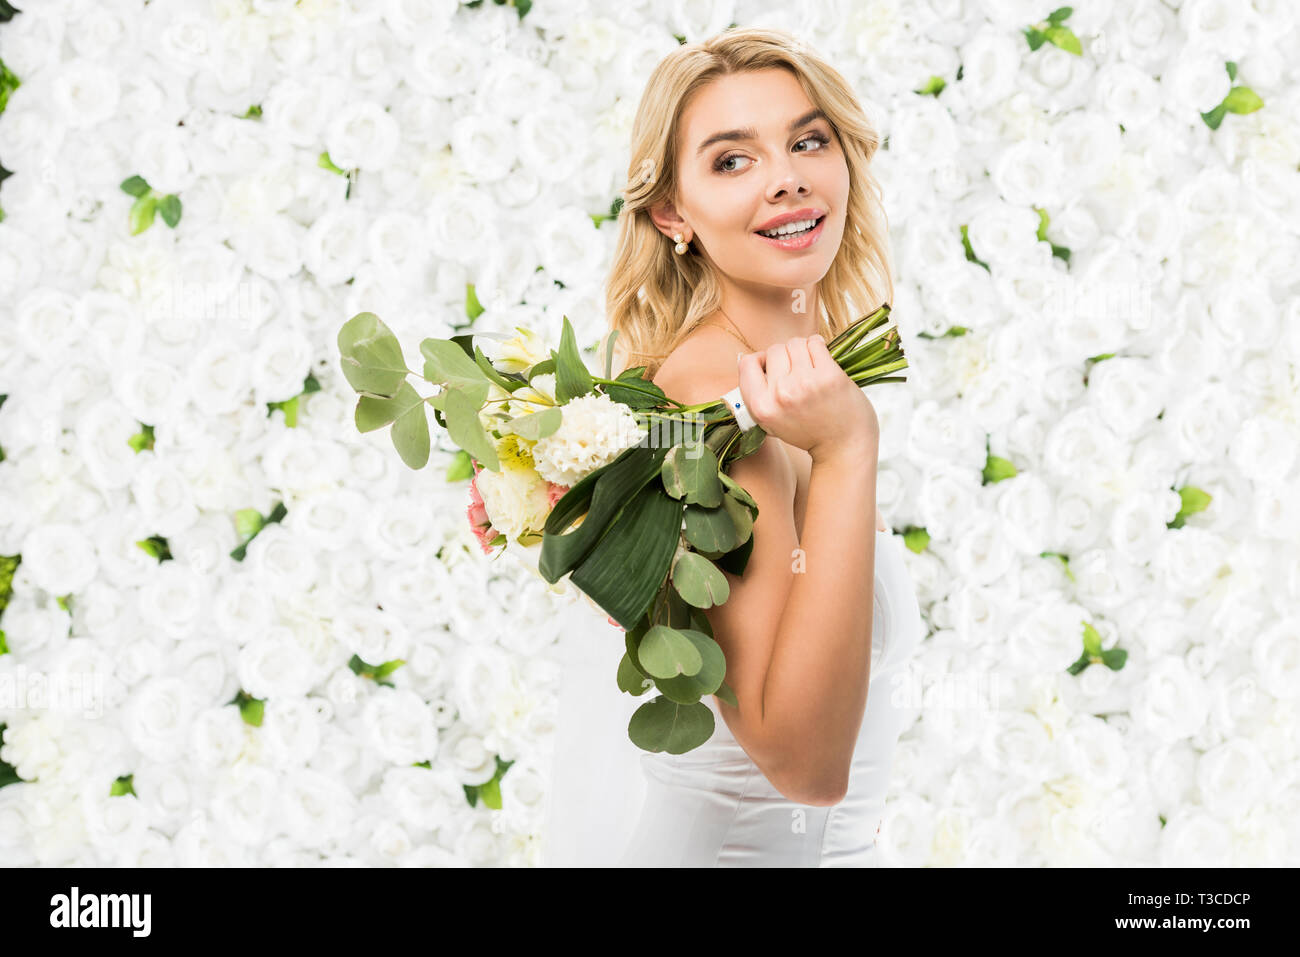 beautiful bride holding wedding bouquet on white floral background Stock Photo